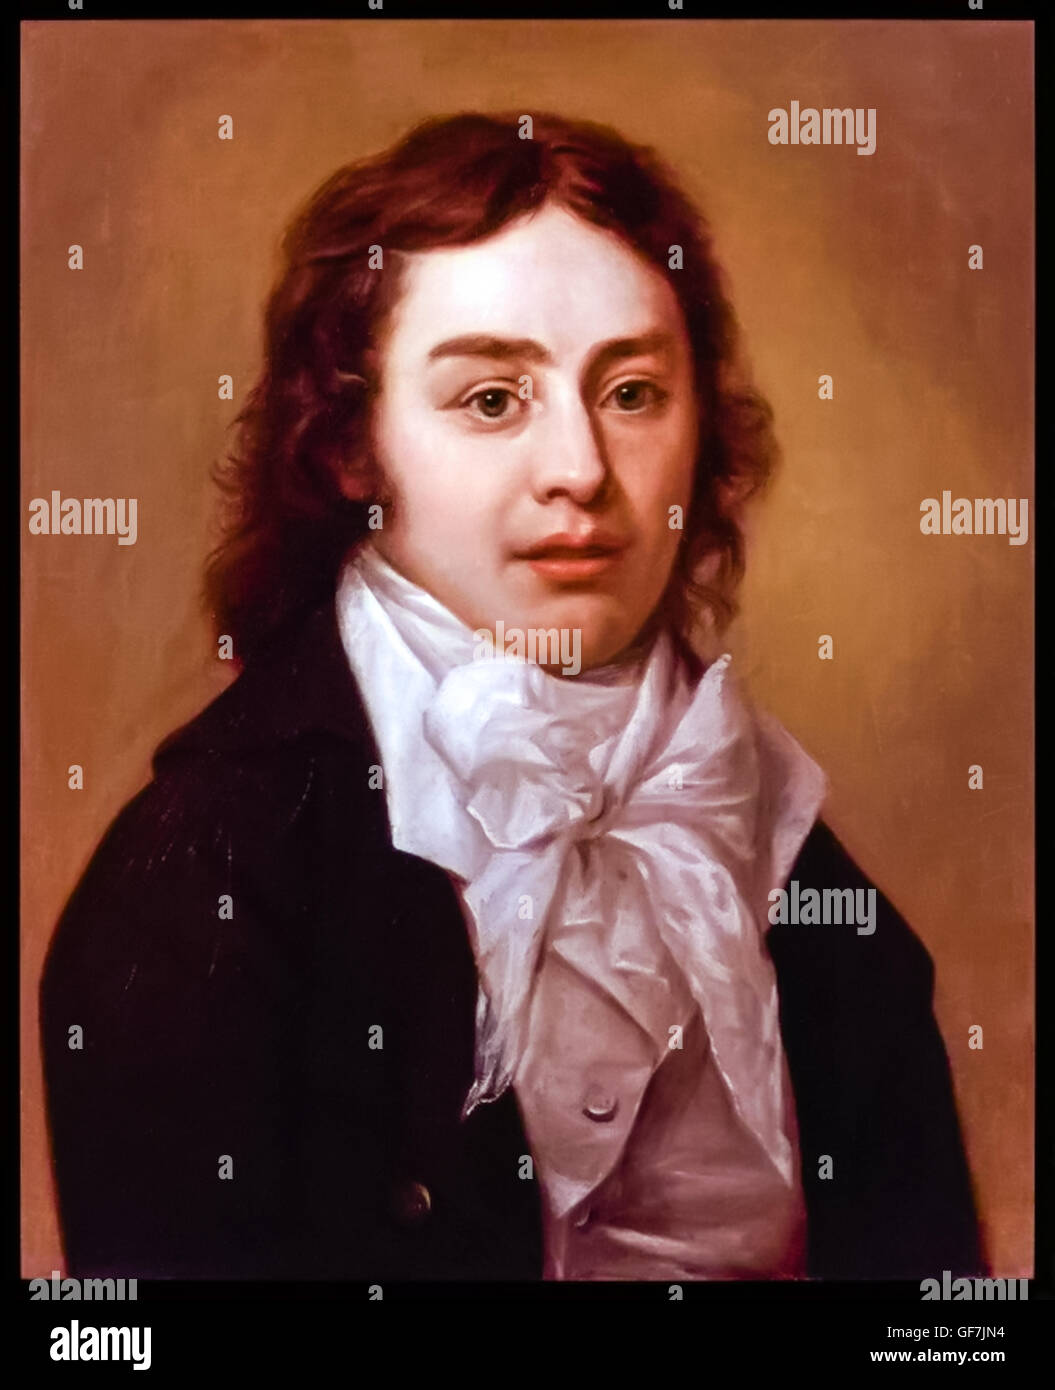 Samuel Taylor Coleridge (1772-1834) English poet, literary critic and philosopher. After an oil painting by Peter Vandyke in 1795. Stock Photo